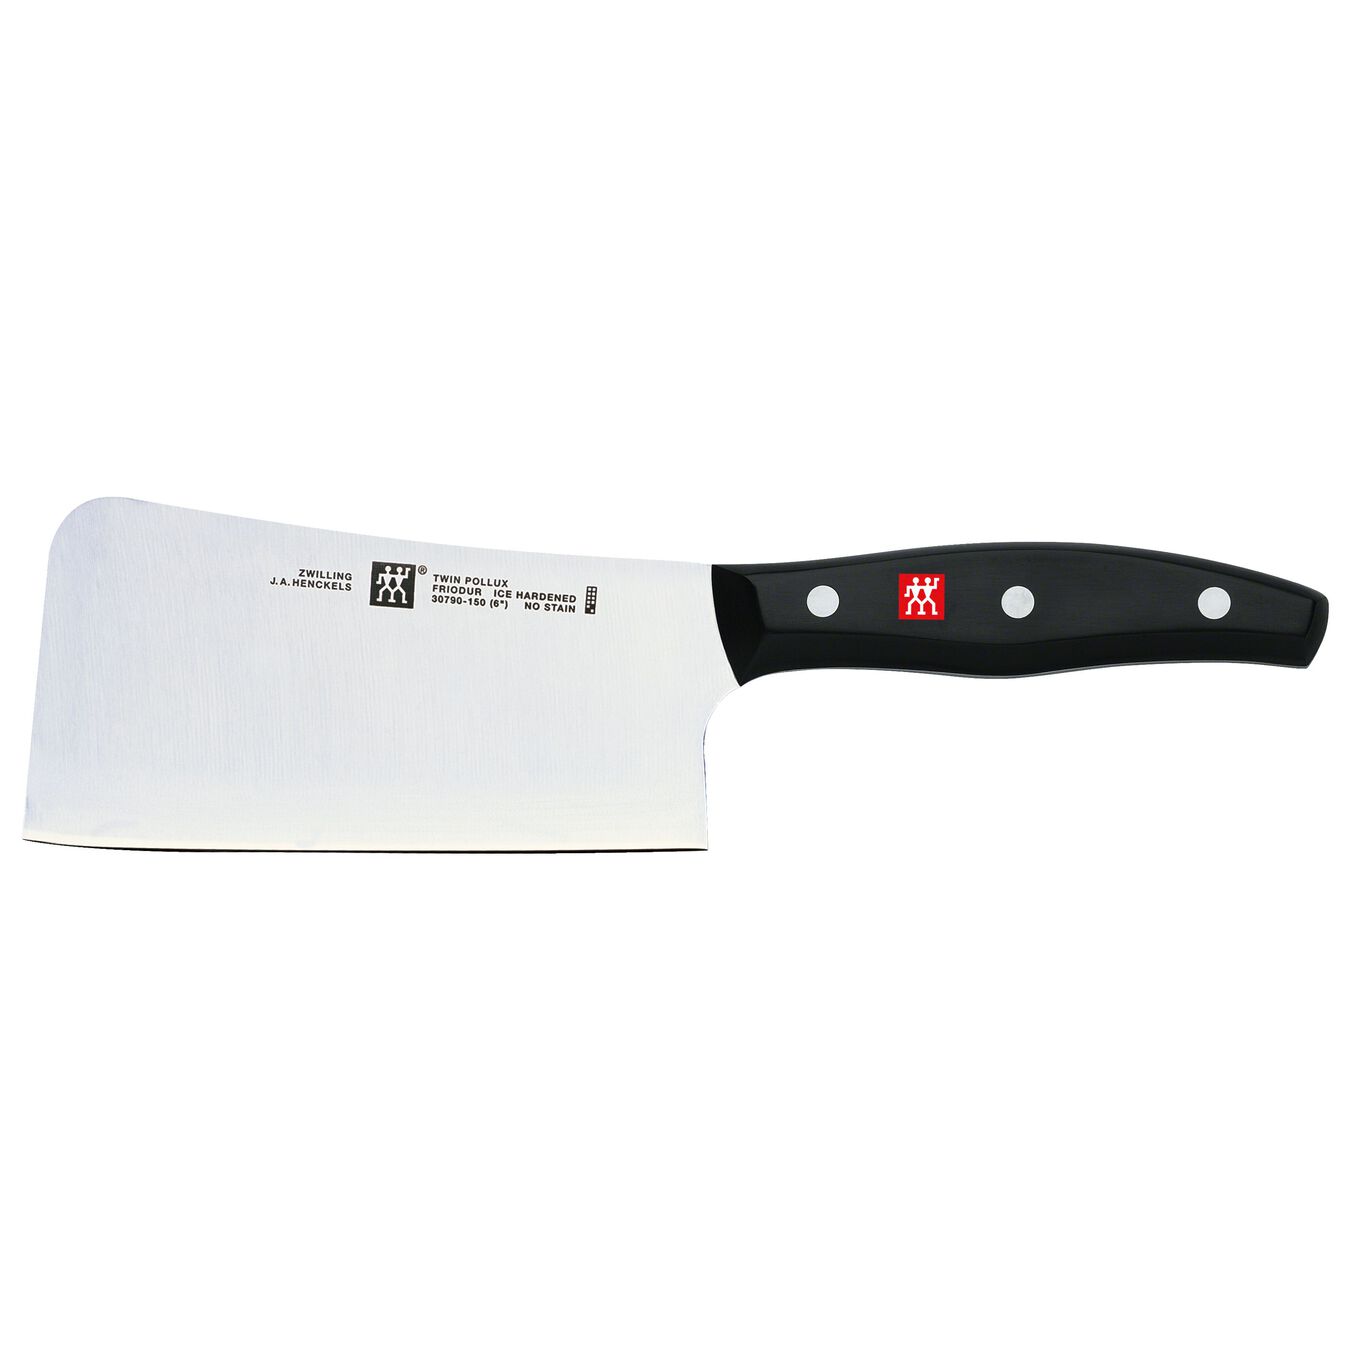 6 inch Cleaver,,large 2